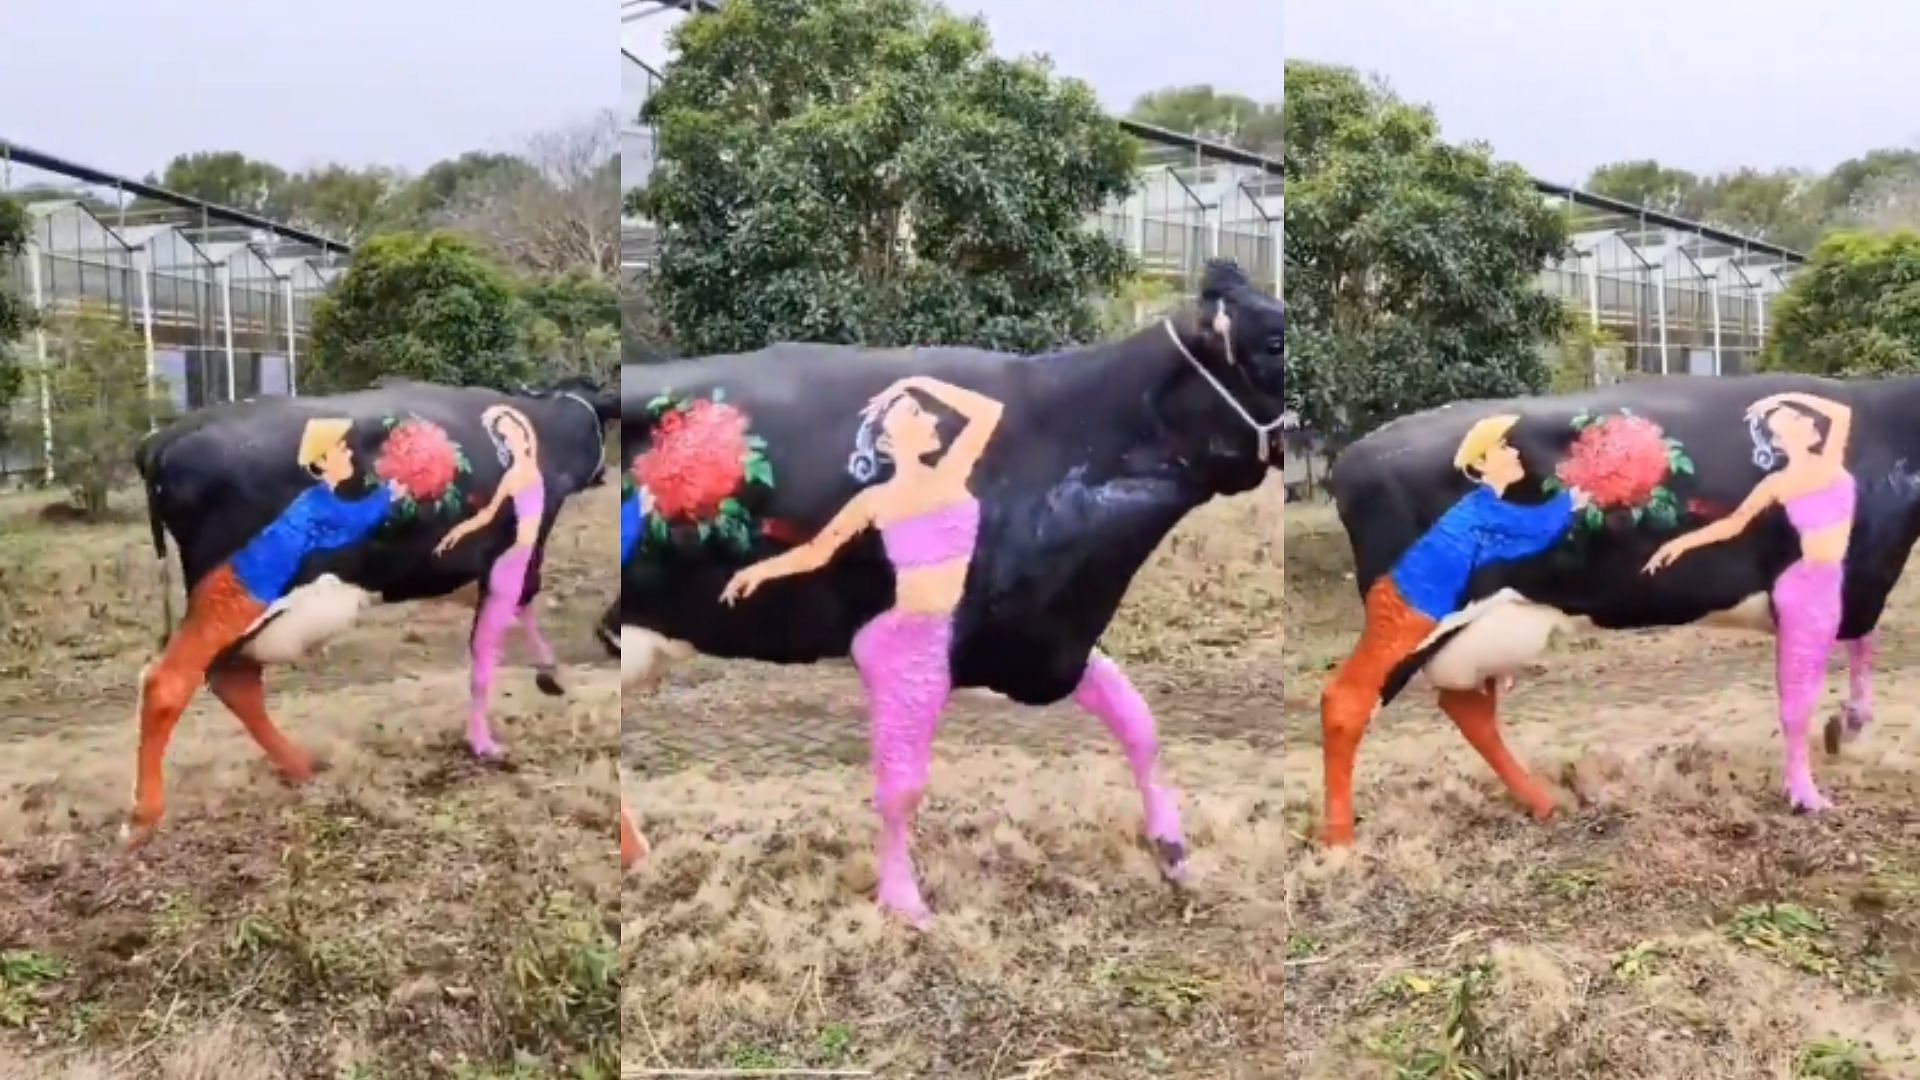 painting on cow back for valentines day video goes viral on social media